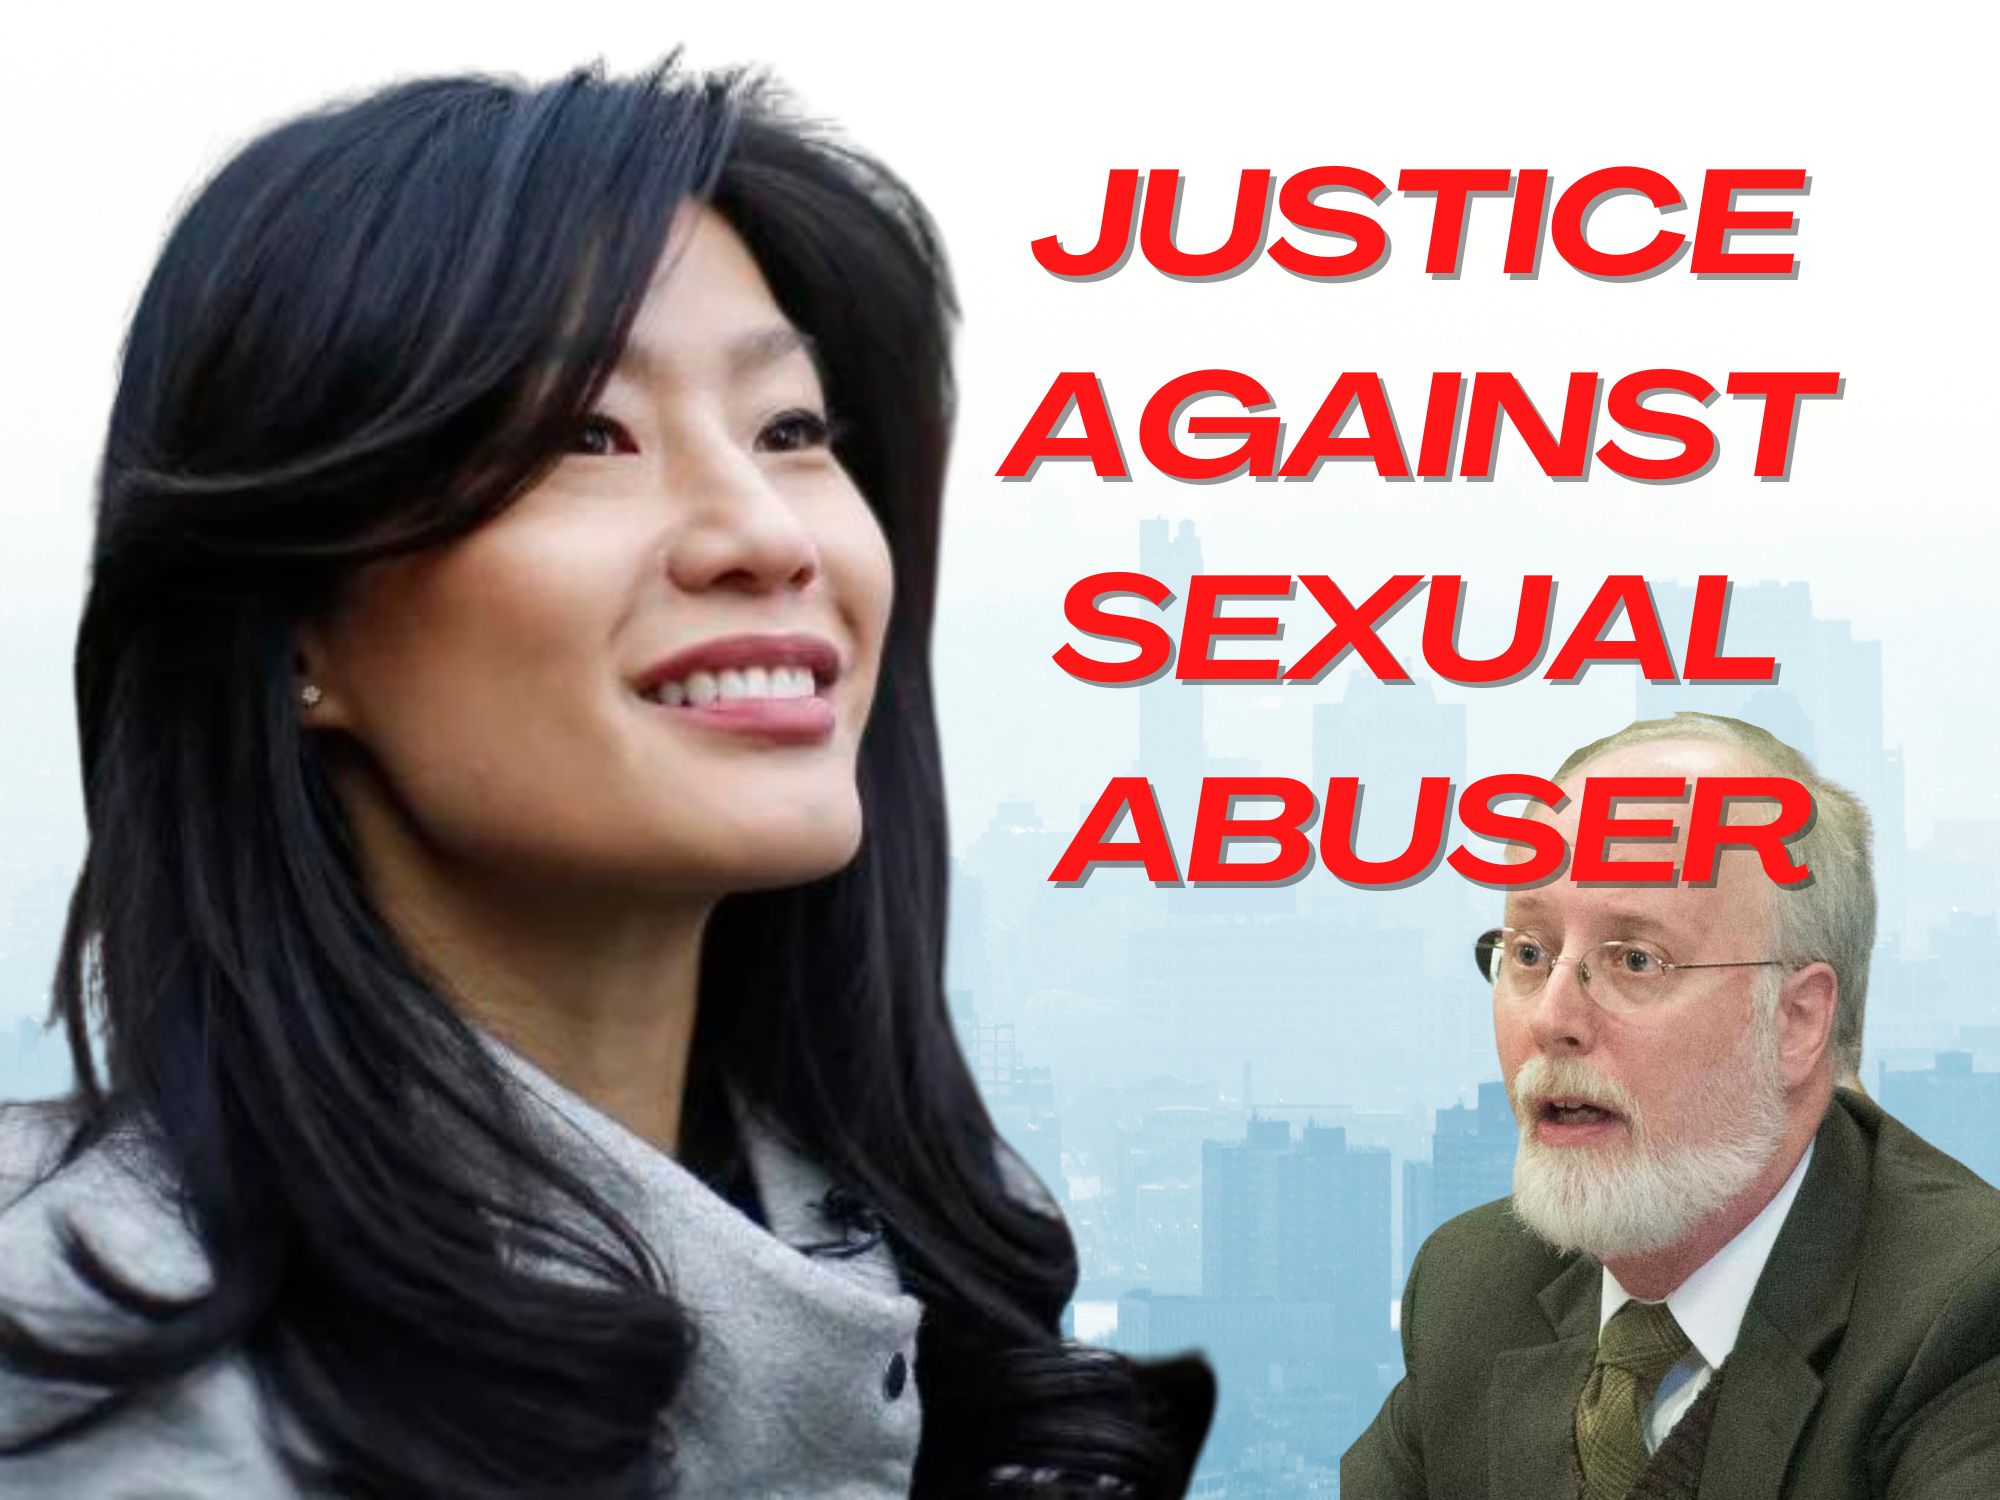 ROBERT HADDEN evelyn yang JUSTICE AGAINST SEXUAL ABUSER